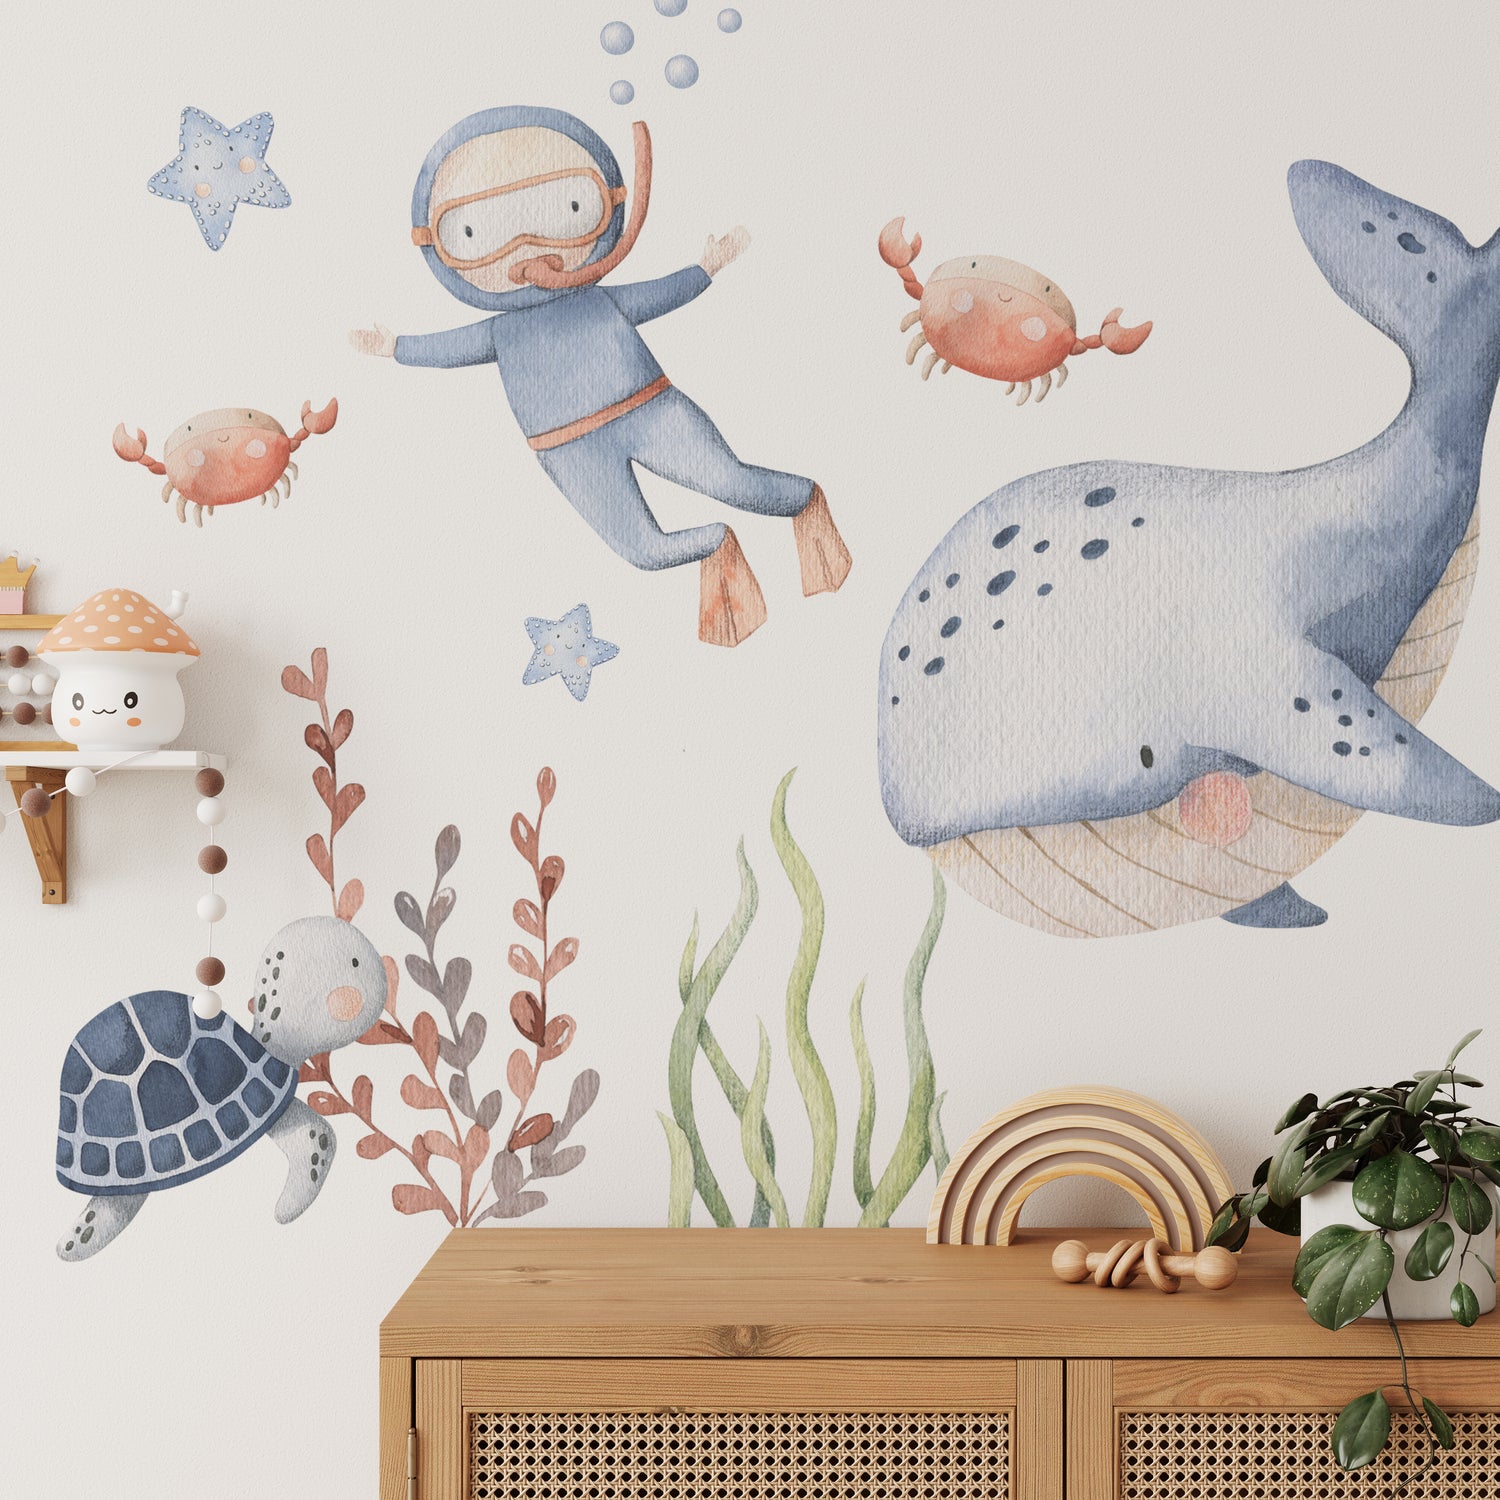 Ocean Themed Wall Stickers